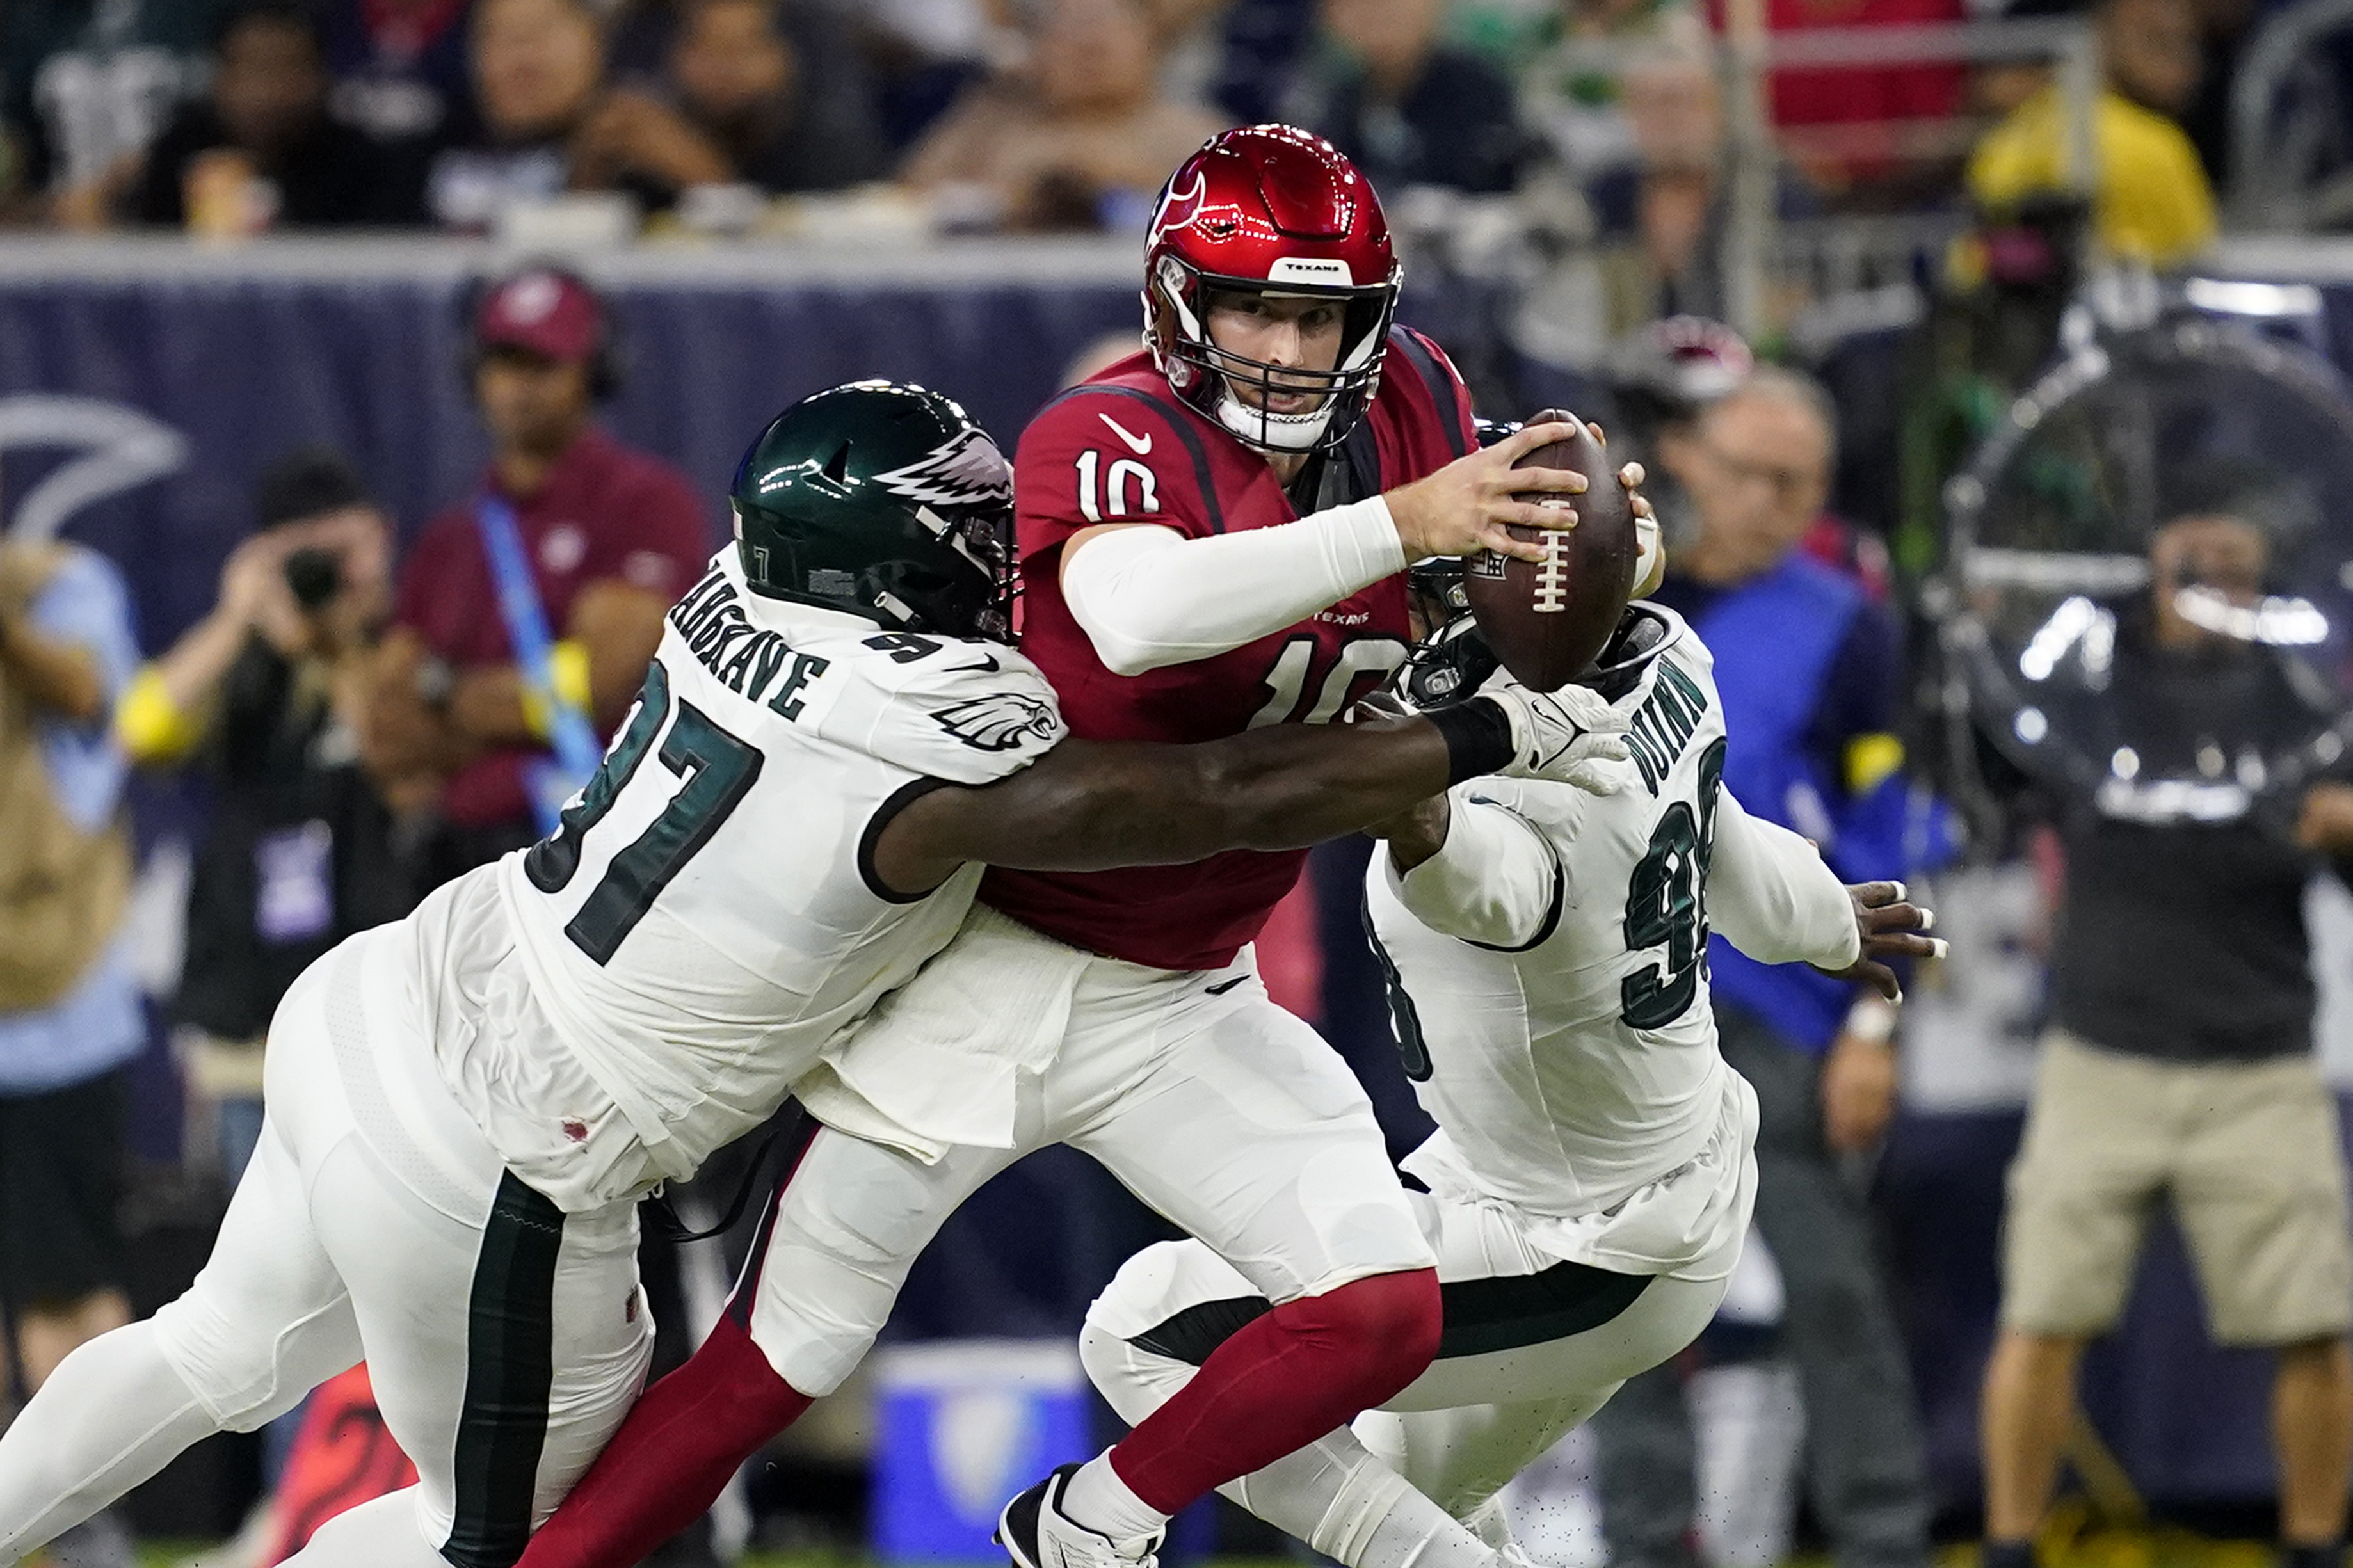 Eagles roll past Texans for first 8-0 start in franchise history